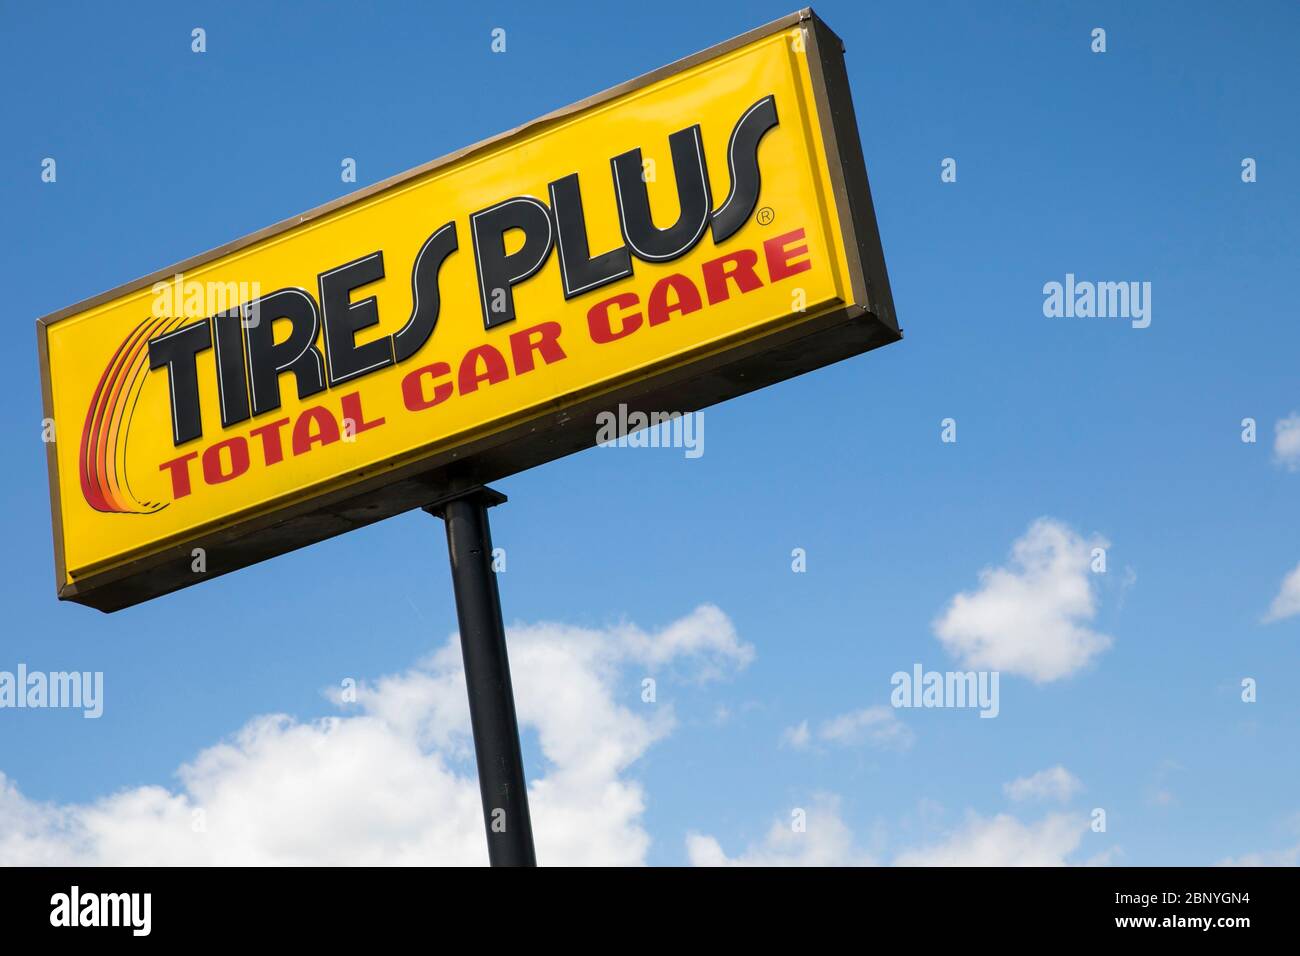 A logo sign outside of a Tires Plus retail store location in Harrisburg, Pennsylvania on May 4, 2020. Stock Photo